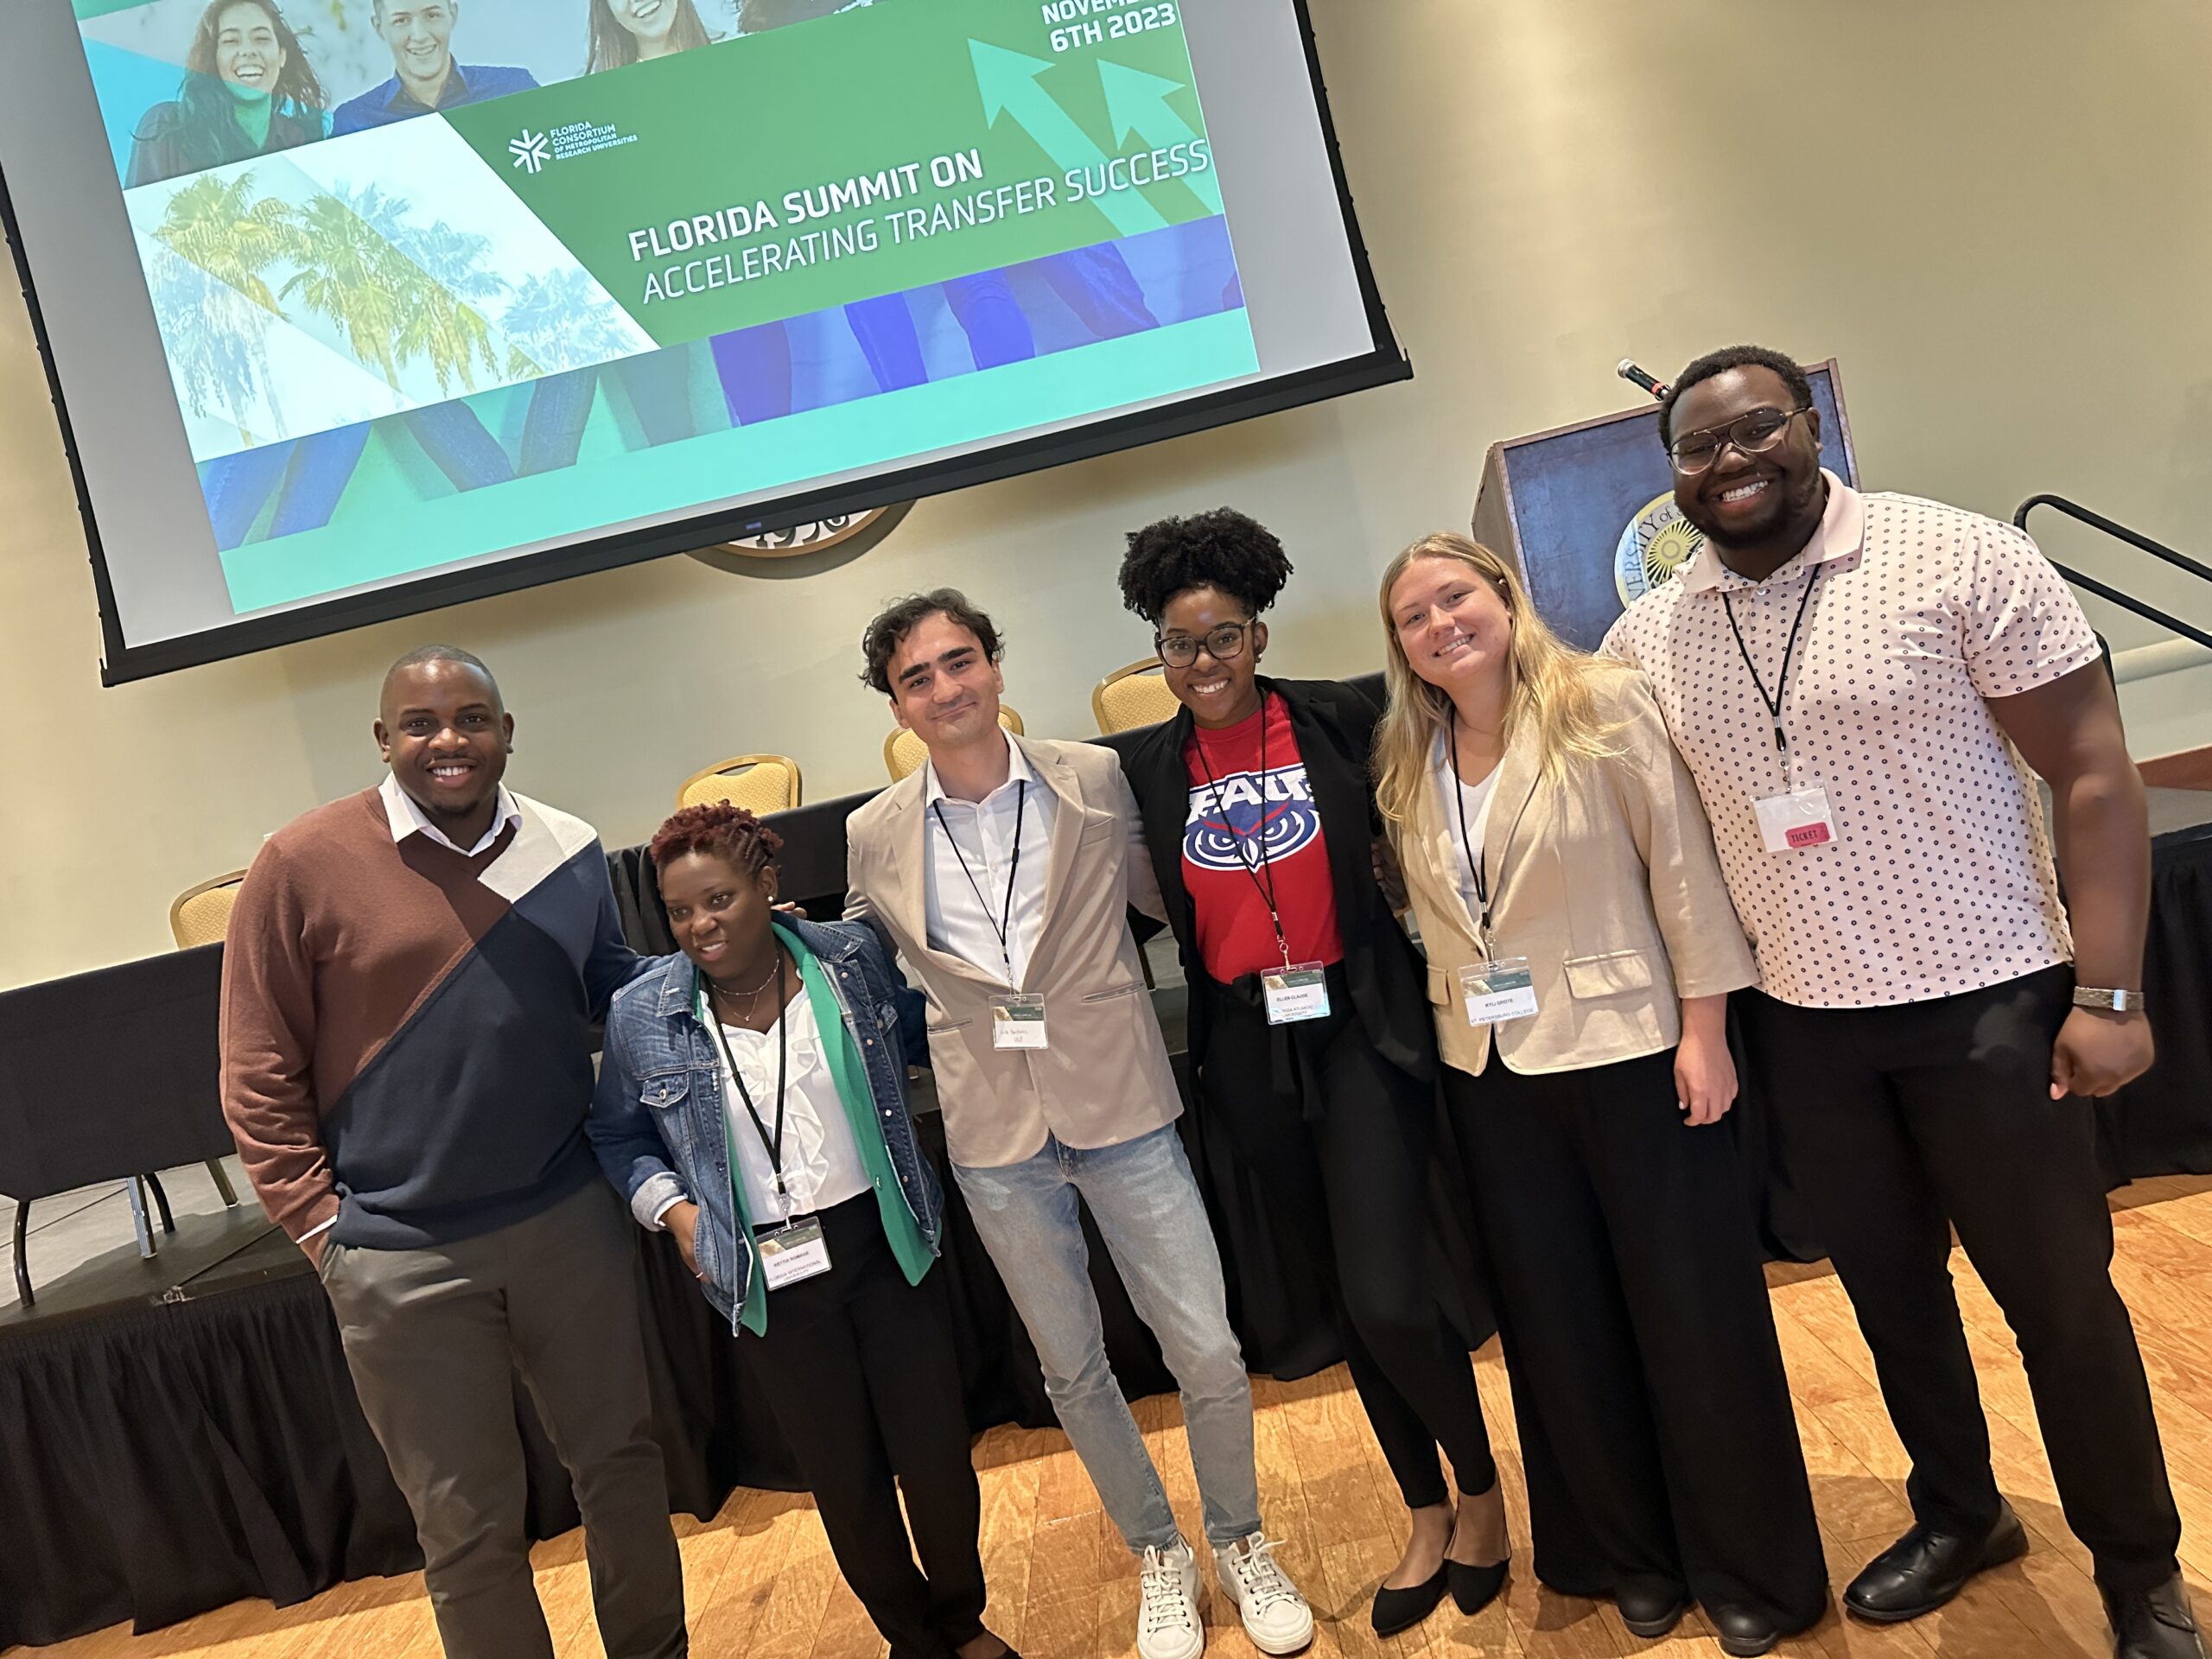 A group of university students posed after a student panel at the 2023 Florida Summit on Accelerating Transfer Success in the Marshall Student Center on the USF Tampa campus.